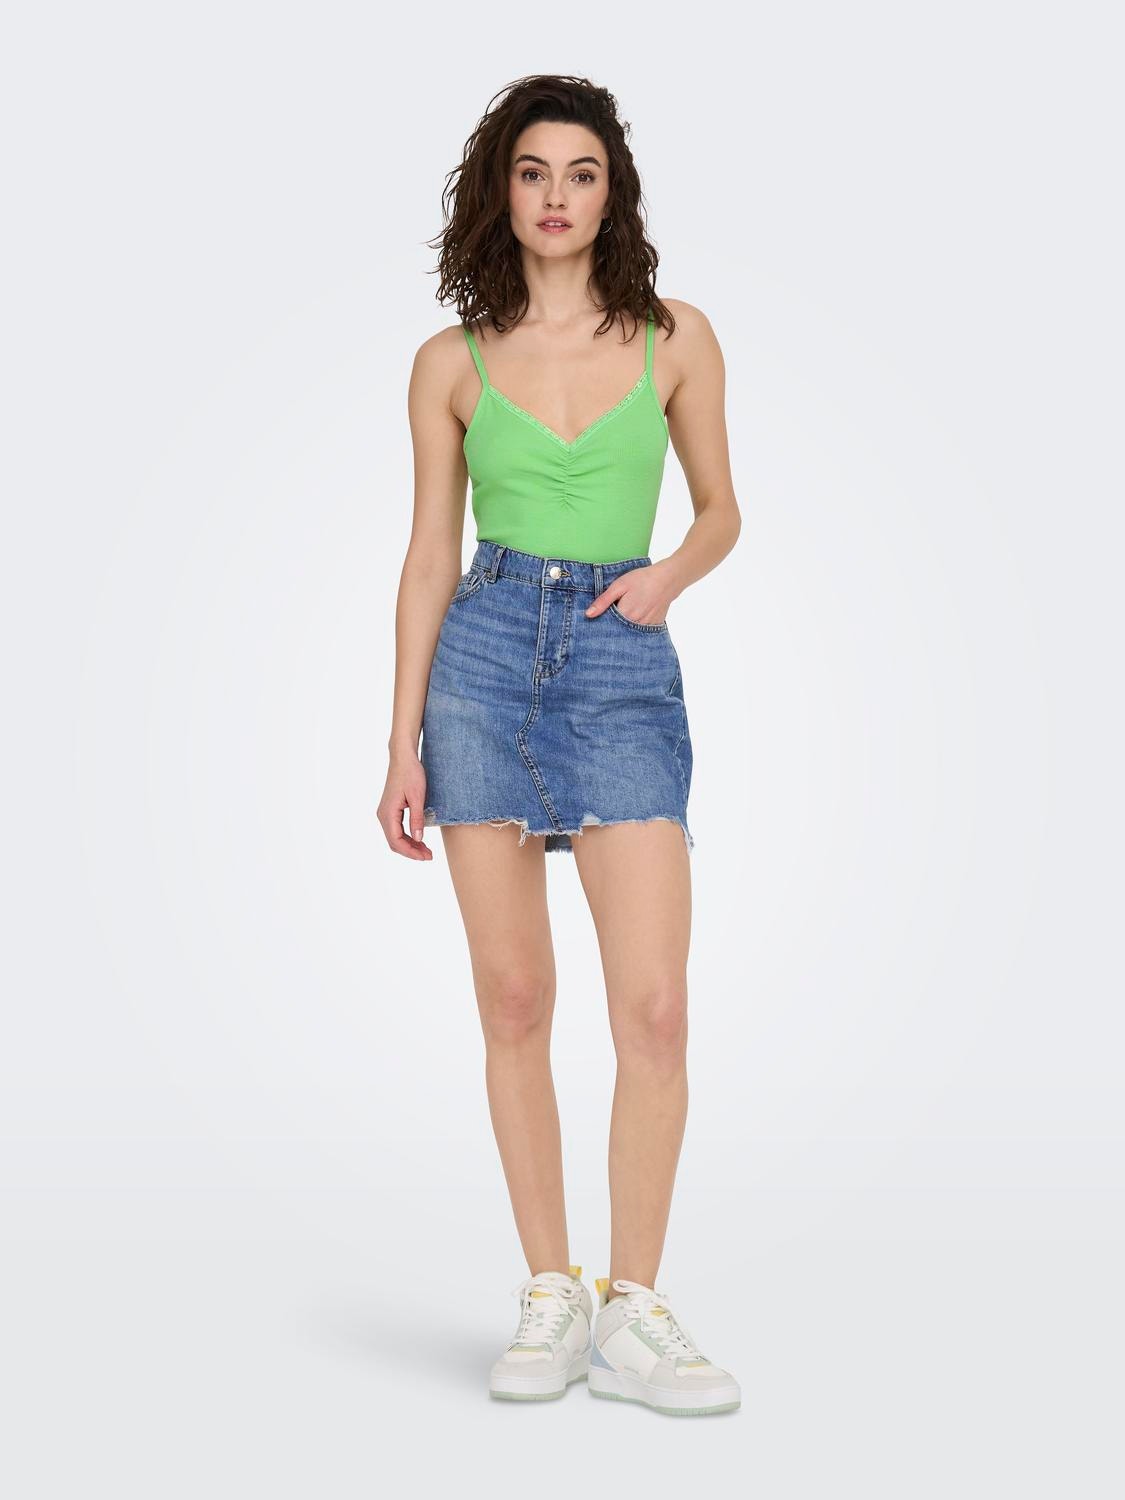 ONLY Singlet Top With Lace Edge -Summer Green - 15289730